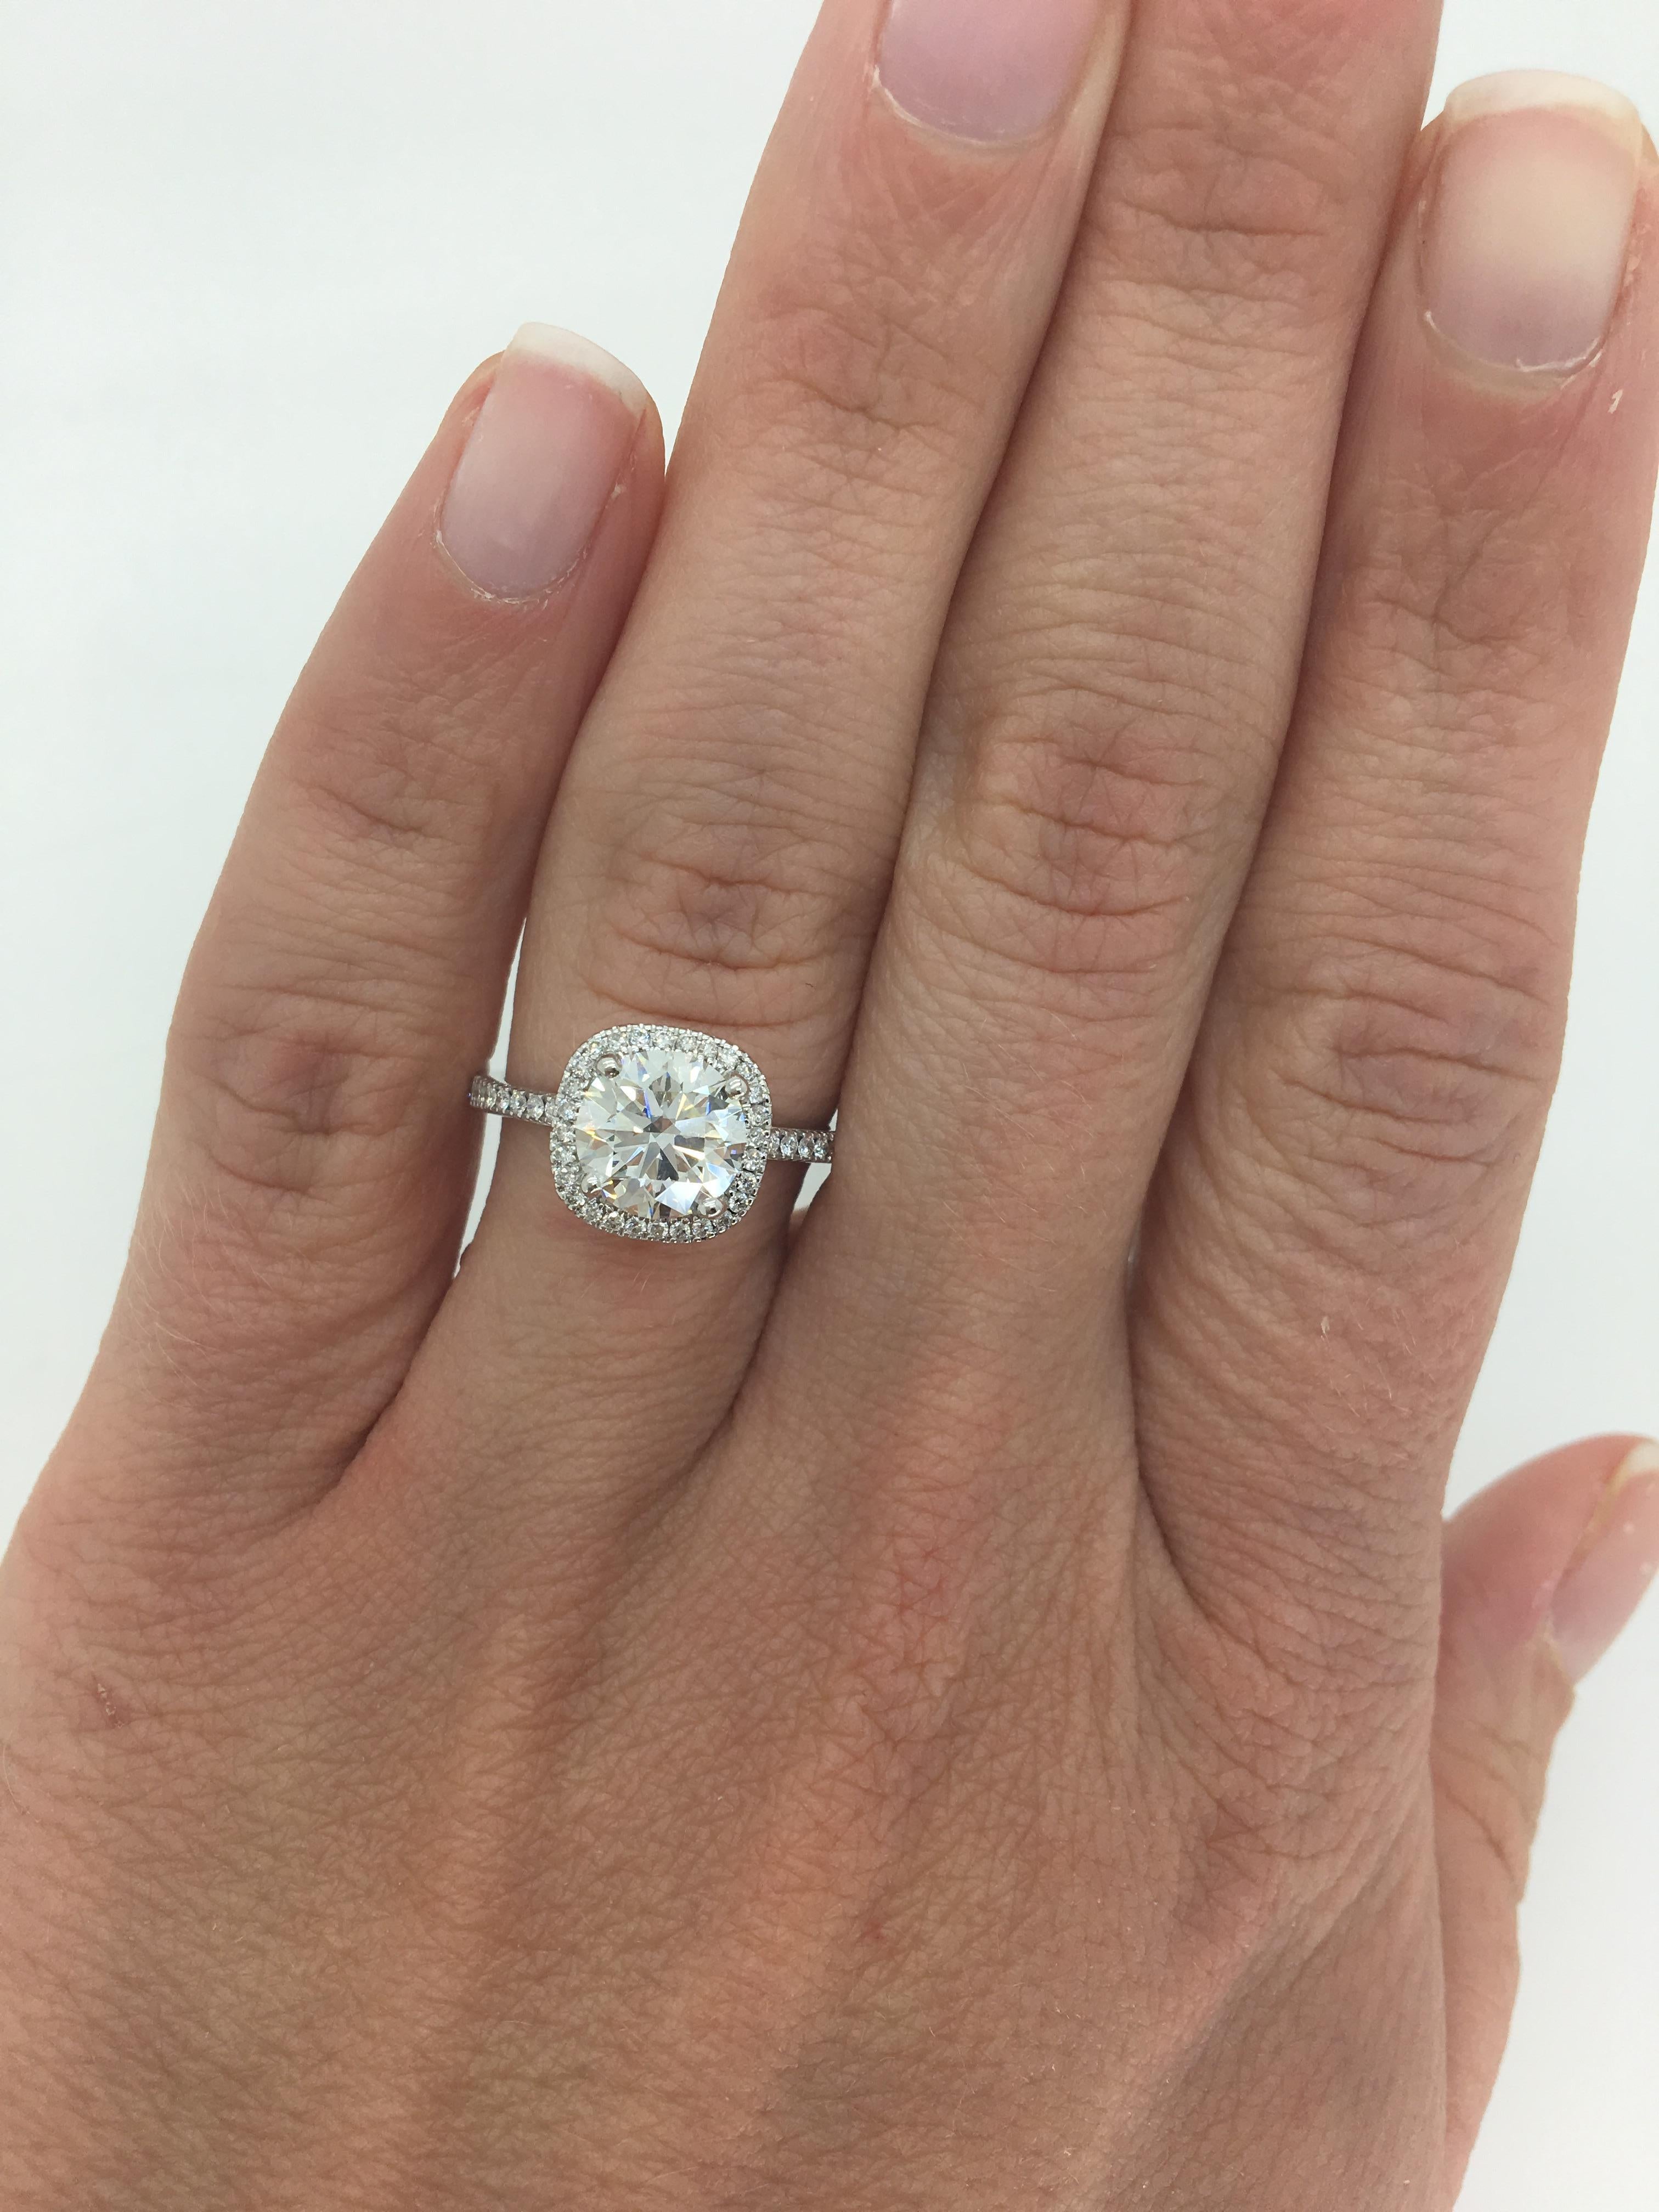 This GIA Certified Round Brilliant Cut Diamond is set in an elegant Simon G, 18k white gold halo style diamond ring.

GIA Certified: 5146933899 Electronic copy only
Center Diamond Carat Weight: 1.65CT
Center Diamond Cut: Round Brilliant
Center